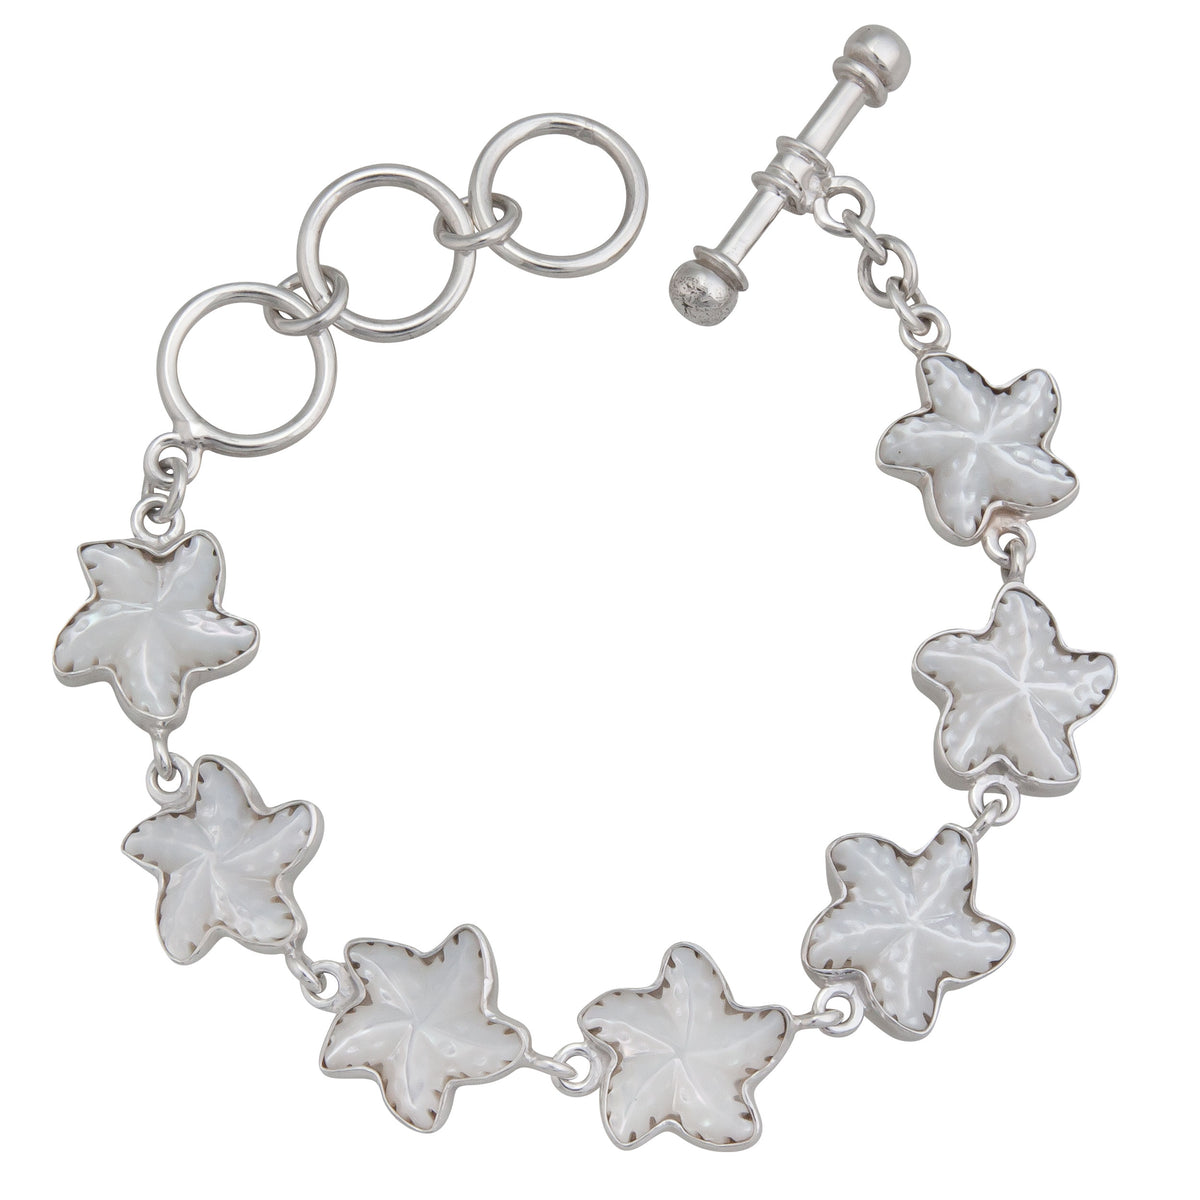 Sterling Silver Mother of Pearl Starfish Bracelet | Charles Albert Jewelry